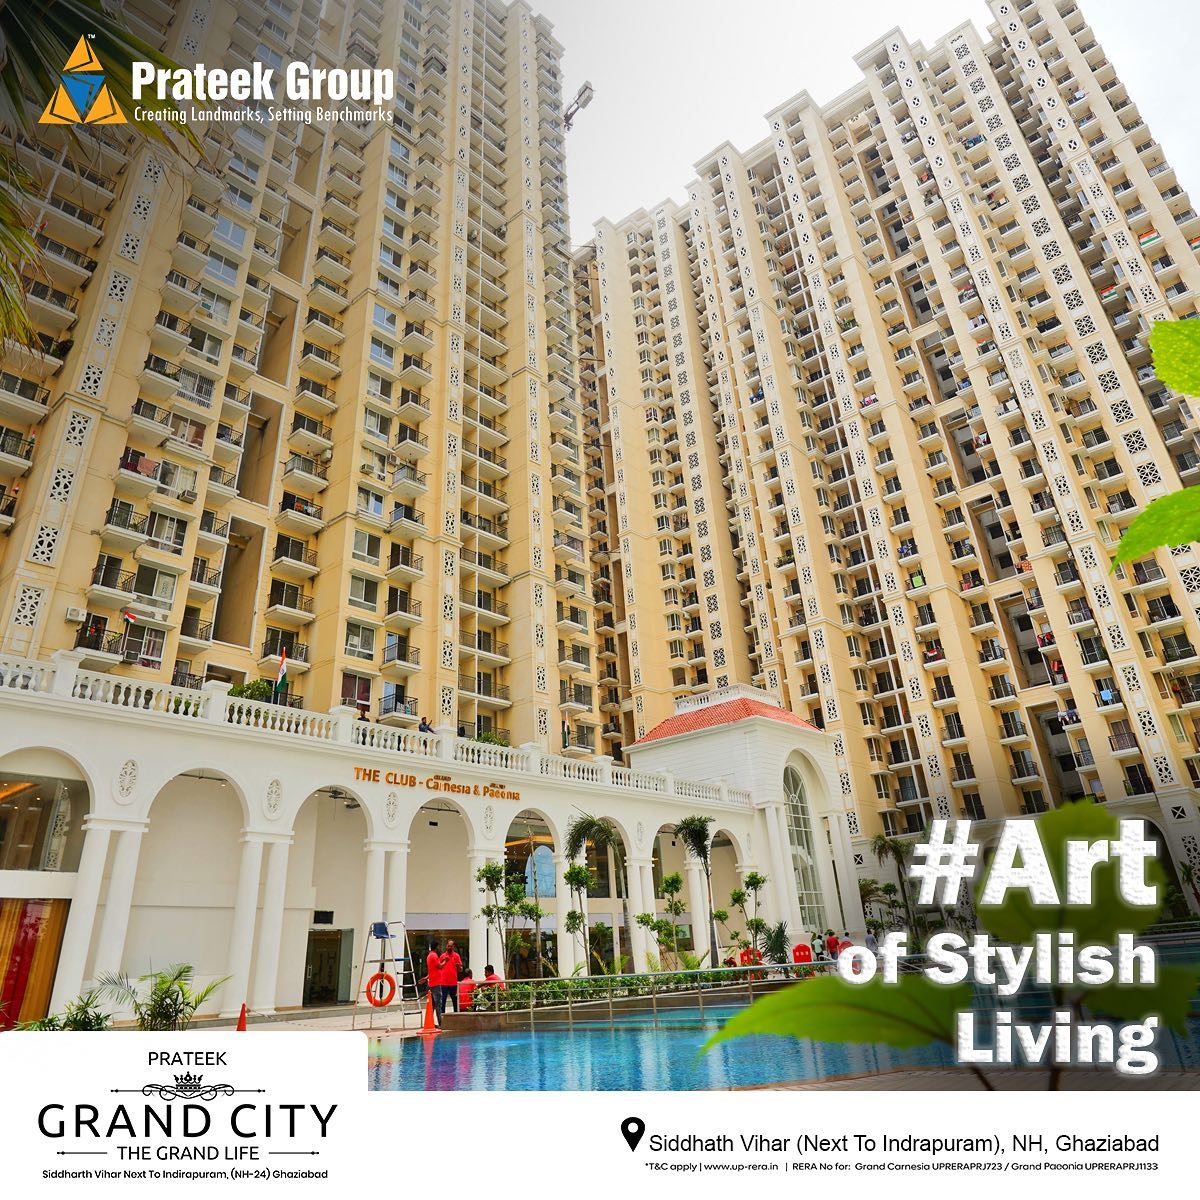 Prateek Grand City surrounded by green yet close to Delhi Update